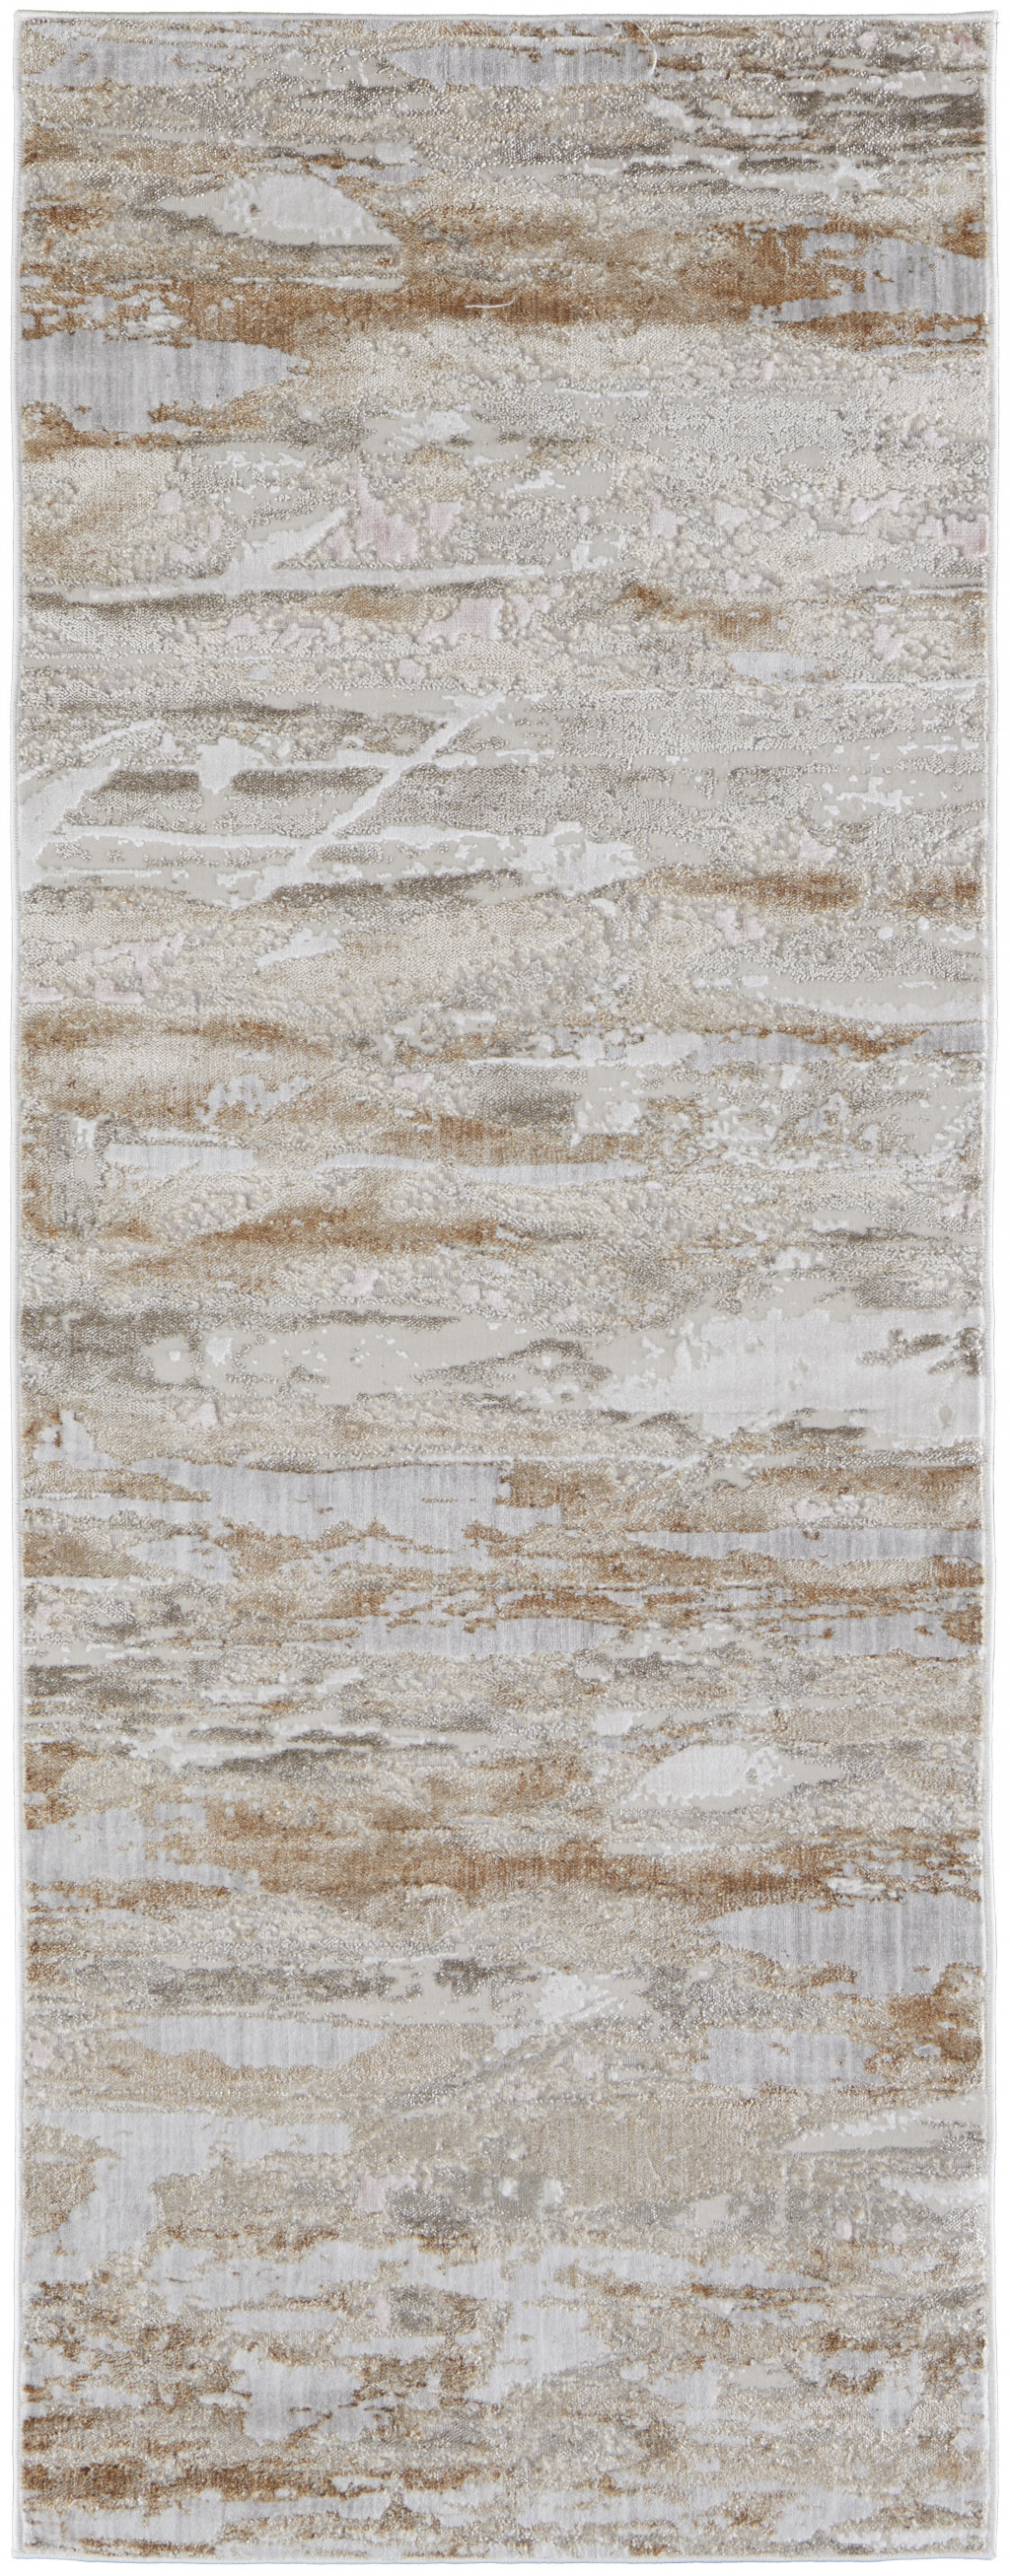 12' Tan And Ivory Abstract Power Loom Distressed Runner Rug-514146-1